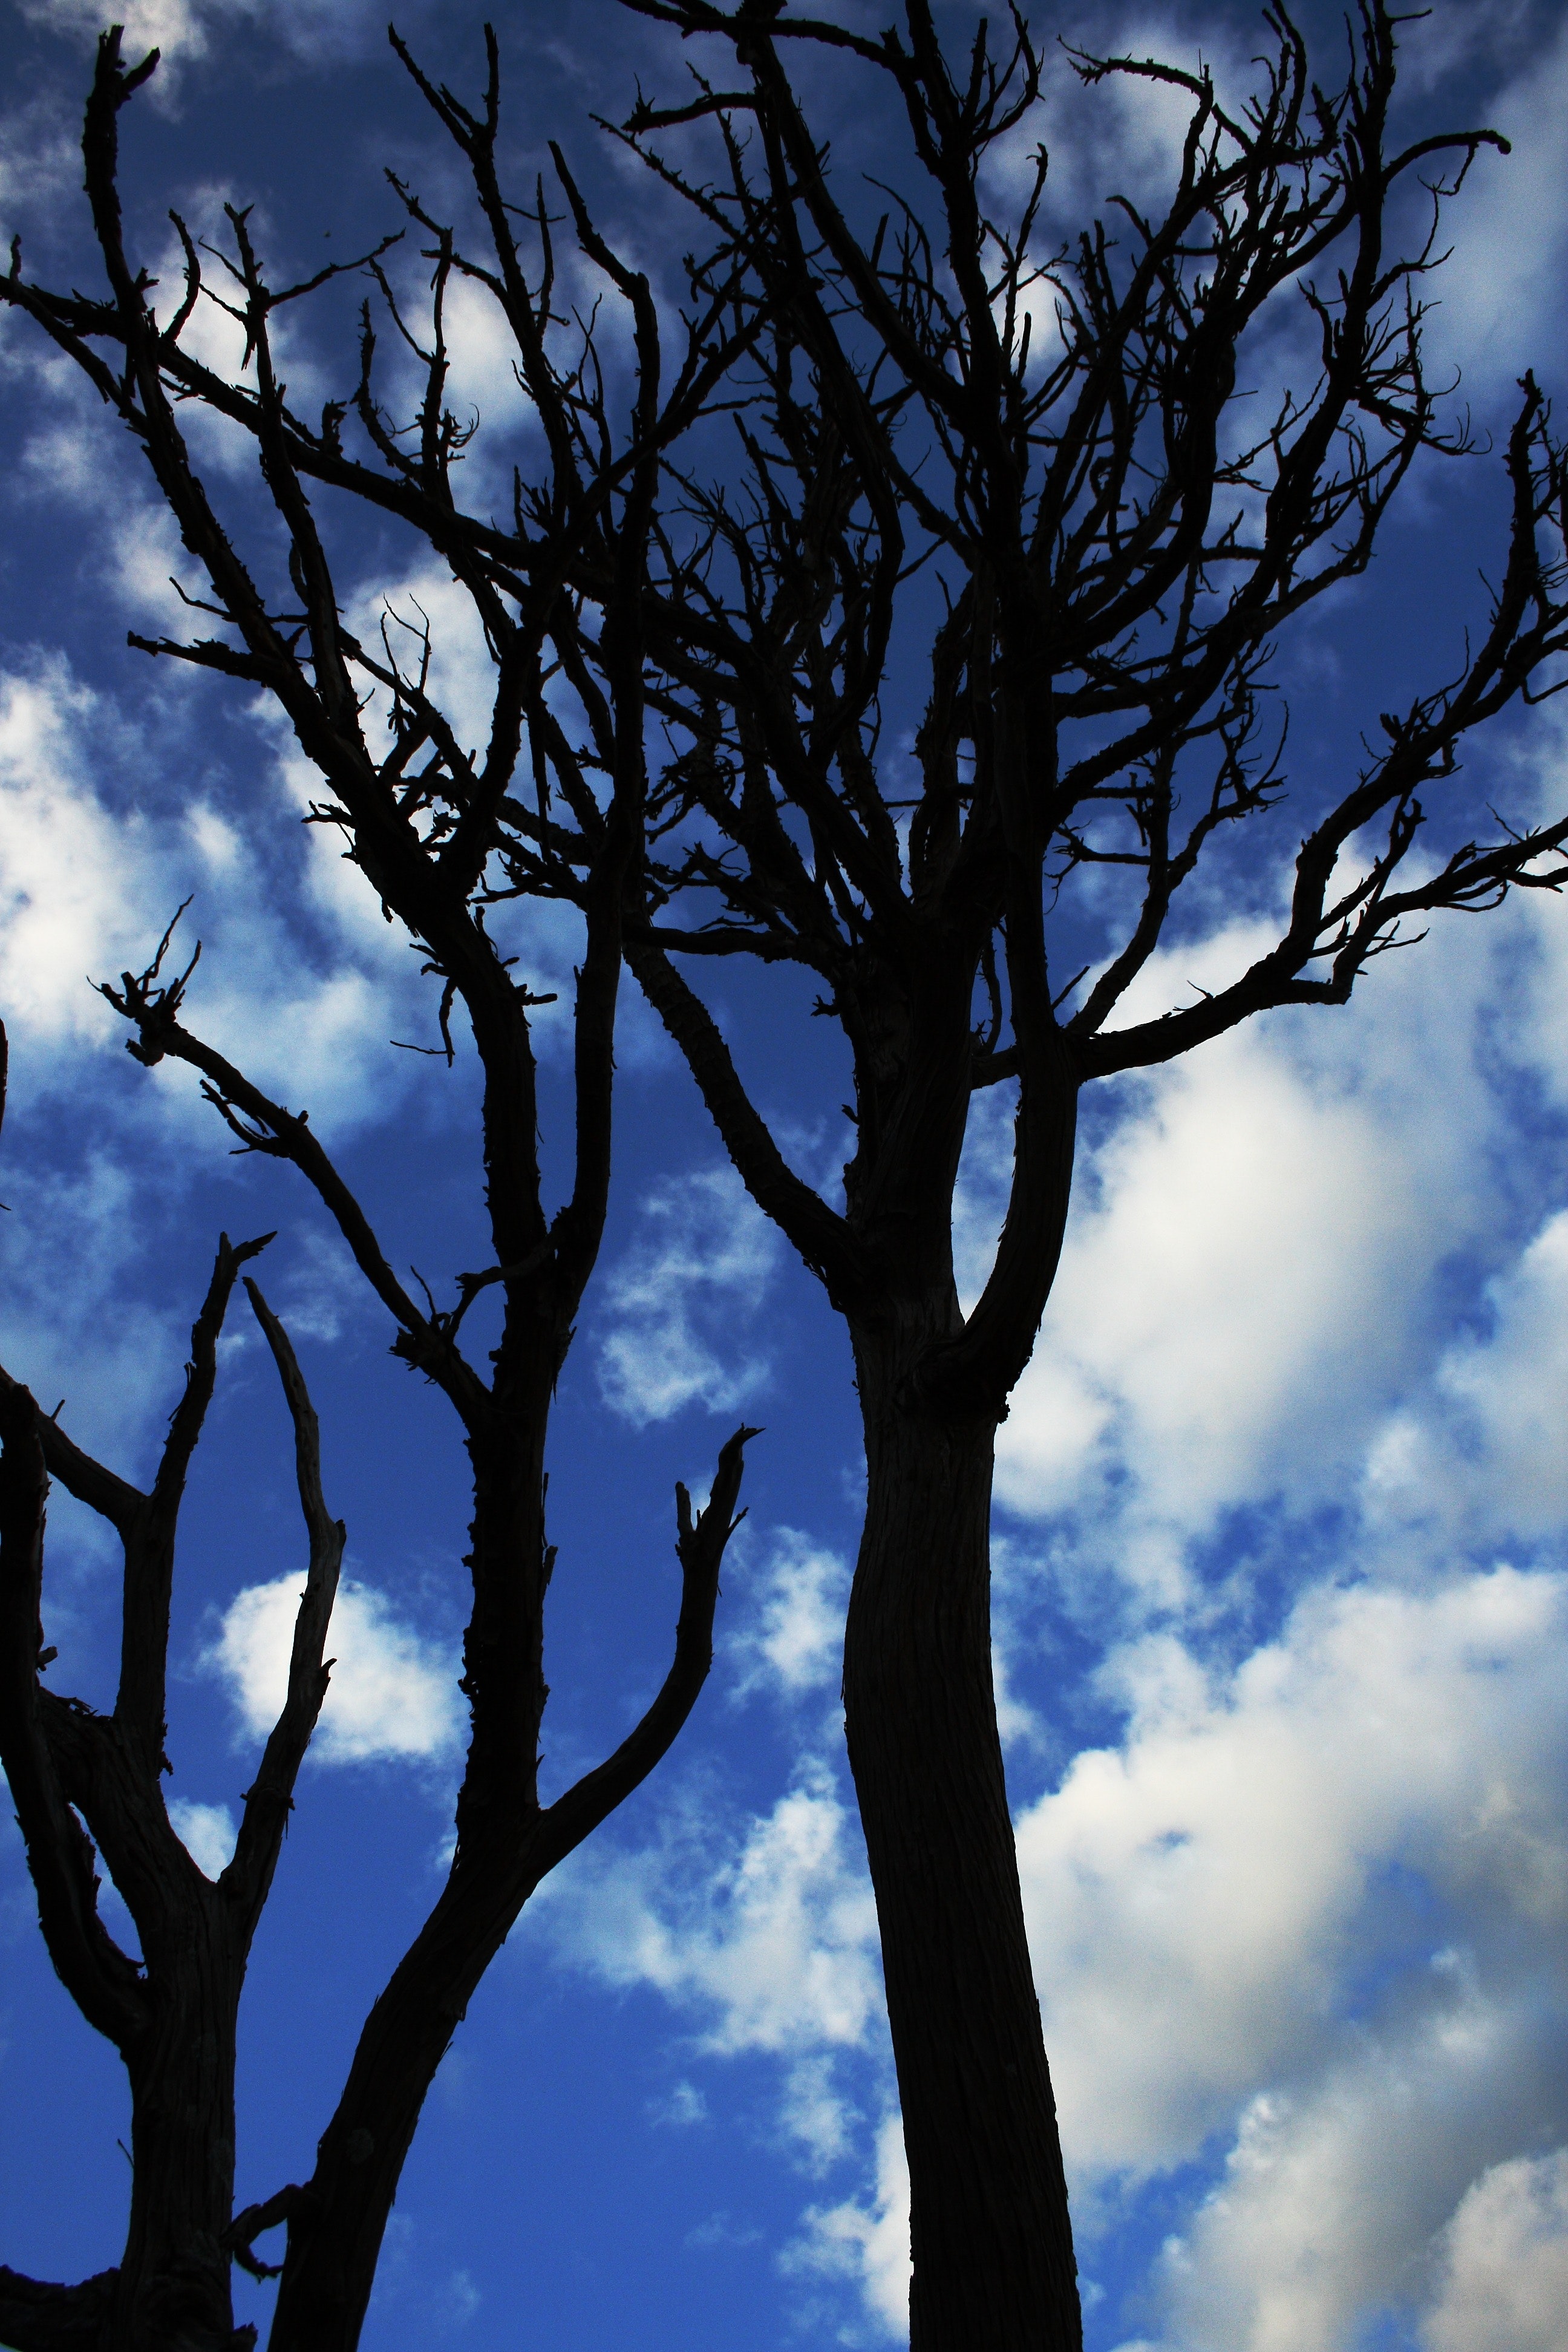 Dead trees under white cloudy blue sky photo